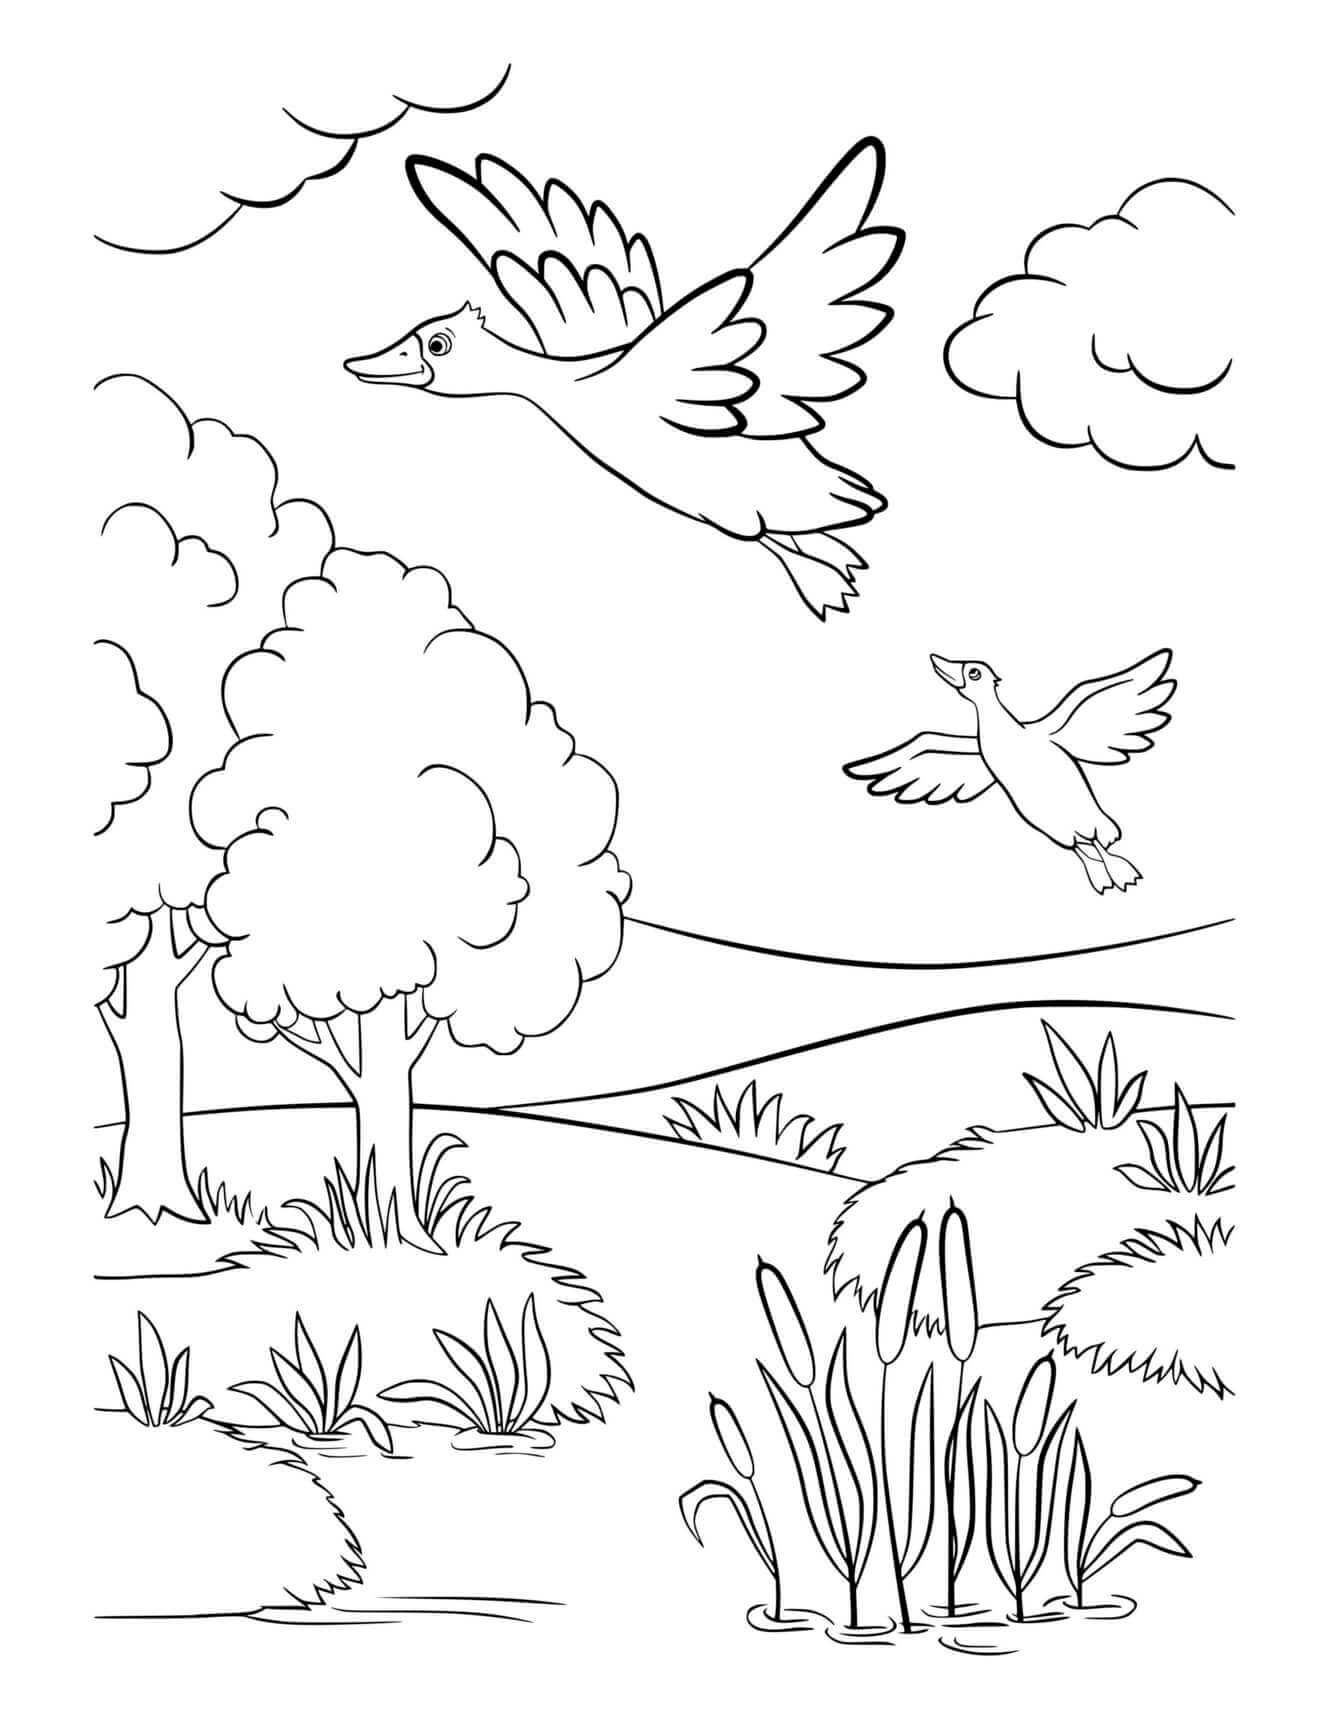 Fall Ducks Flying Near Lake Coloring Page